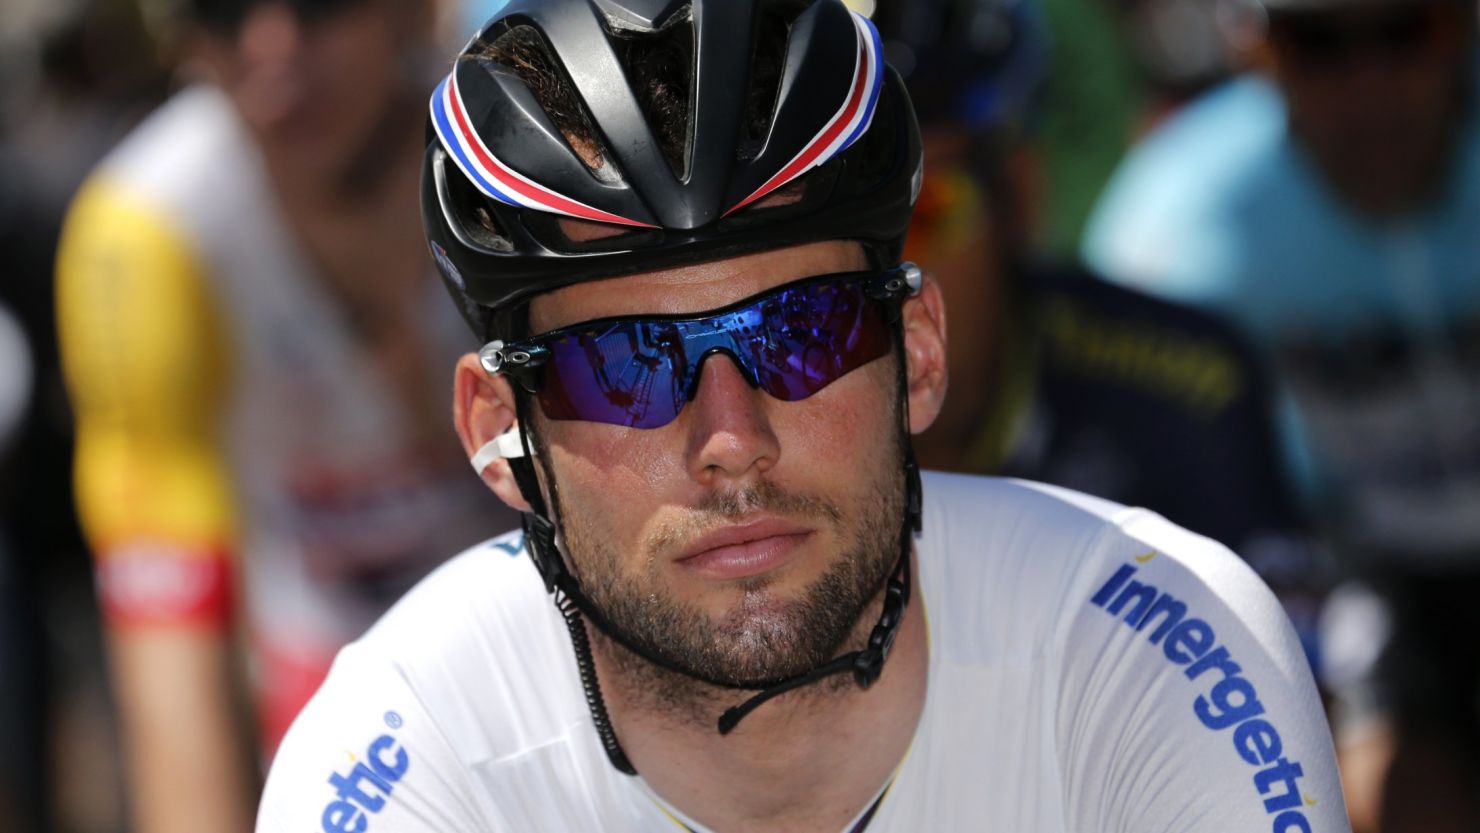 Mark Cavendish took to Twitter to defend himself against accusations he had deliberately nudged Tom Veelers.